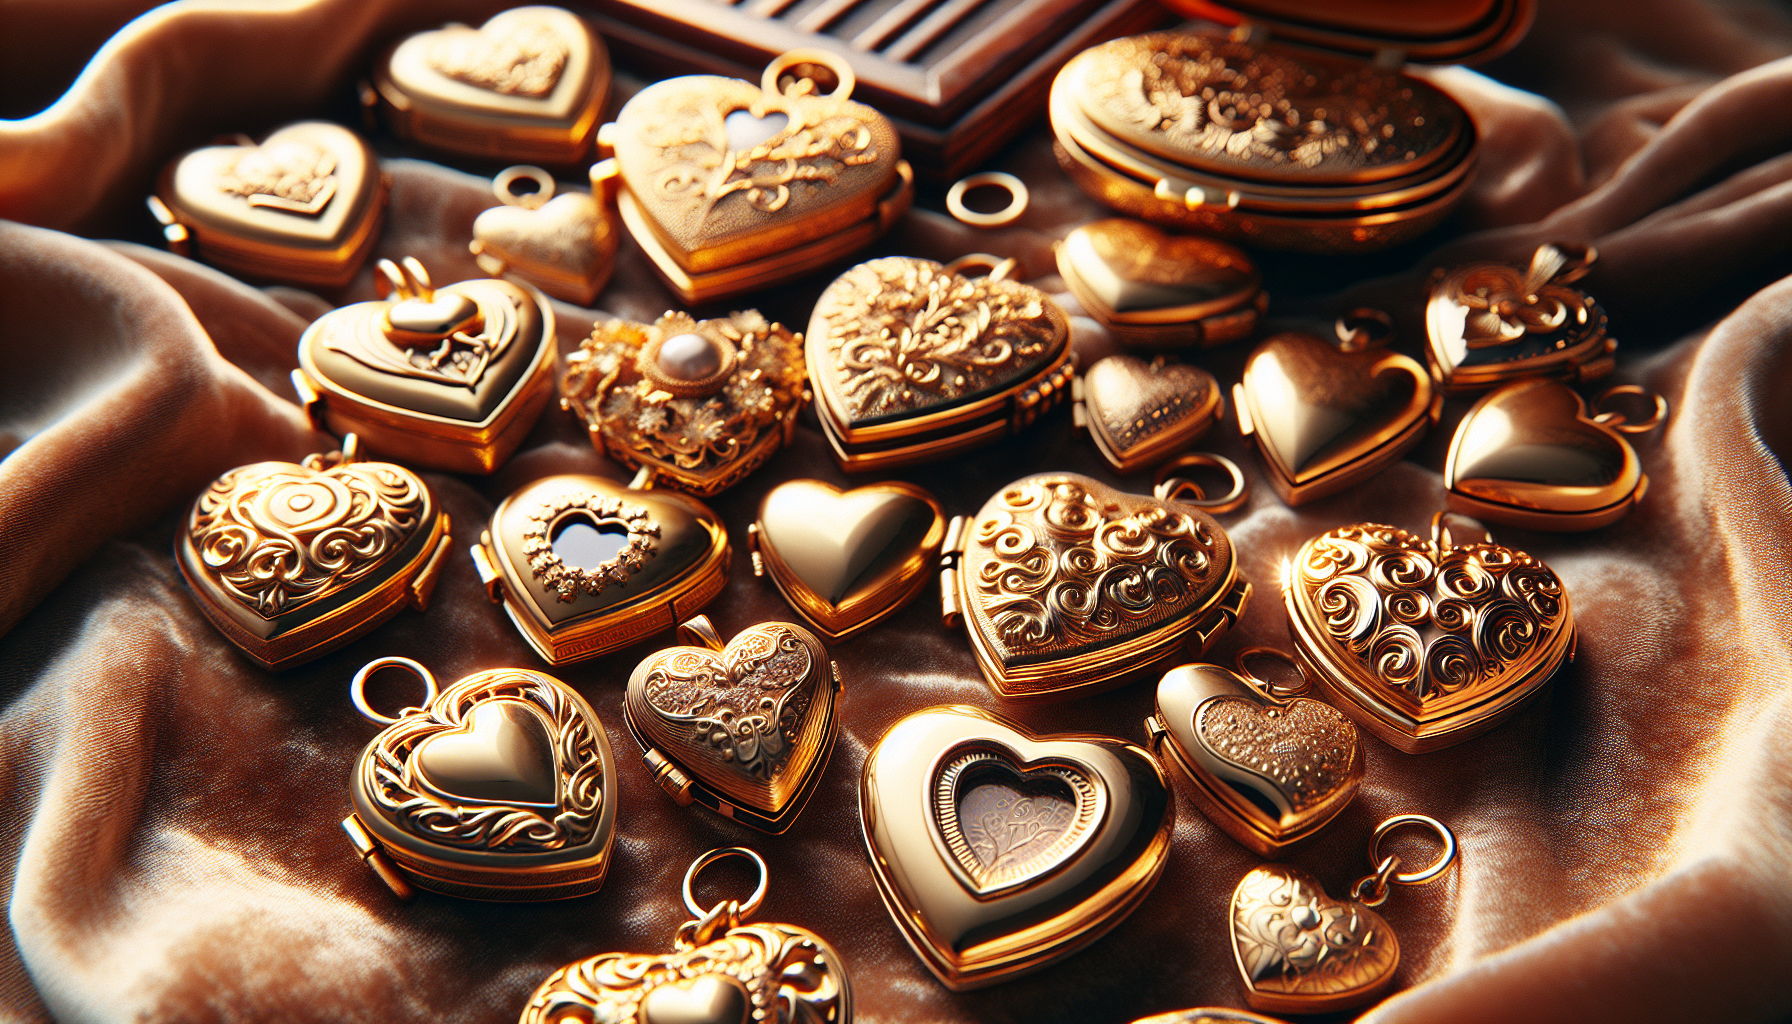 Capture the captivating allure of Gold Heart Lockets. Picture a scene where a variety of these gold heart-shaped lockets are displayed on velvet cloth, their brilliant gold color reflecting in the sof